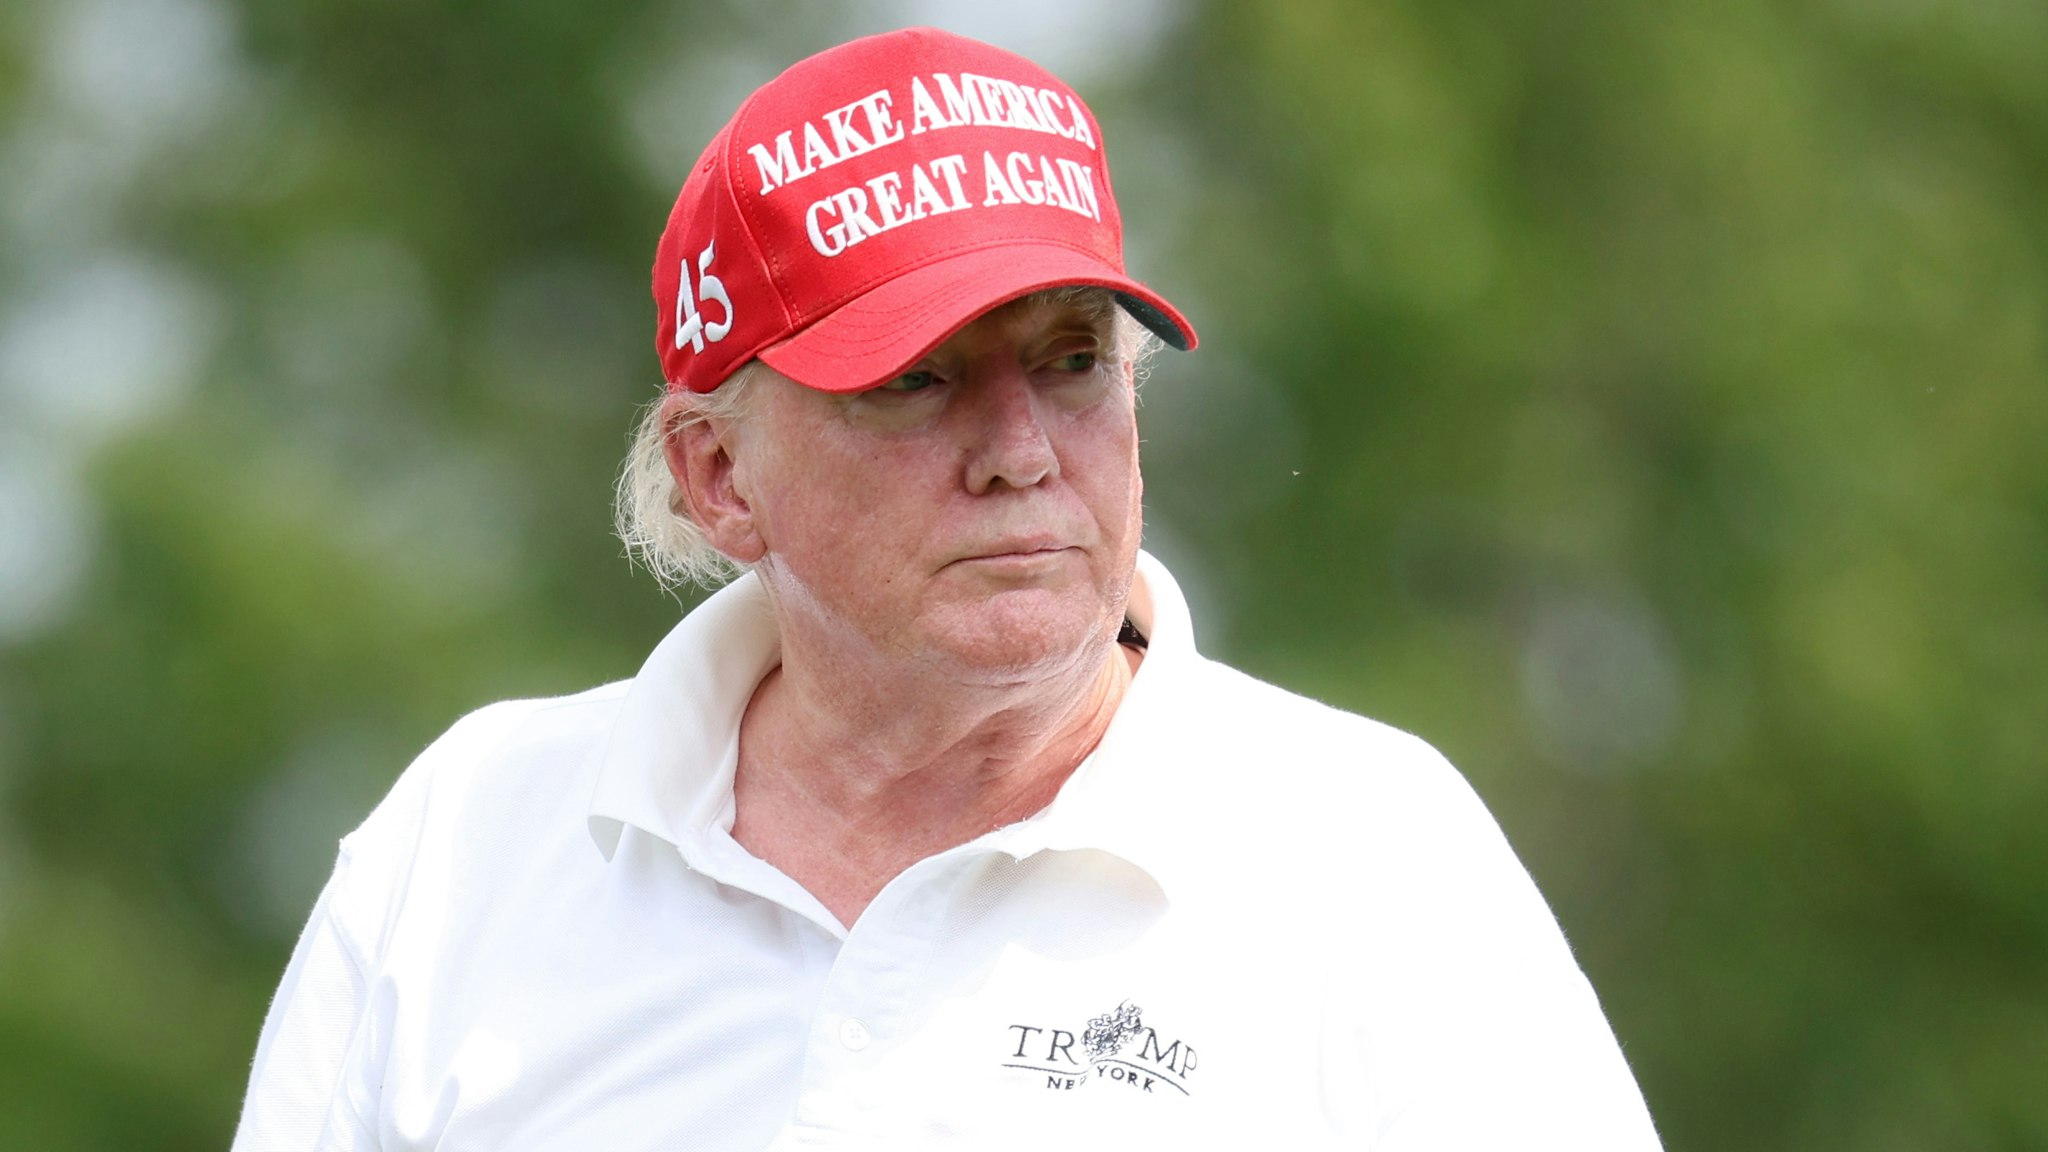 BEDMINSTER, NEW JERSEY - JULY 28: Former U.S. President Donald Trump watches a shot during the pro-am prior to the LIV Golf Invitational - Bedminster at Trump National Golf Club Bedminster on July 28, 2022 in Bedminster, New Jersey.